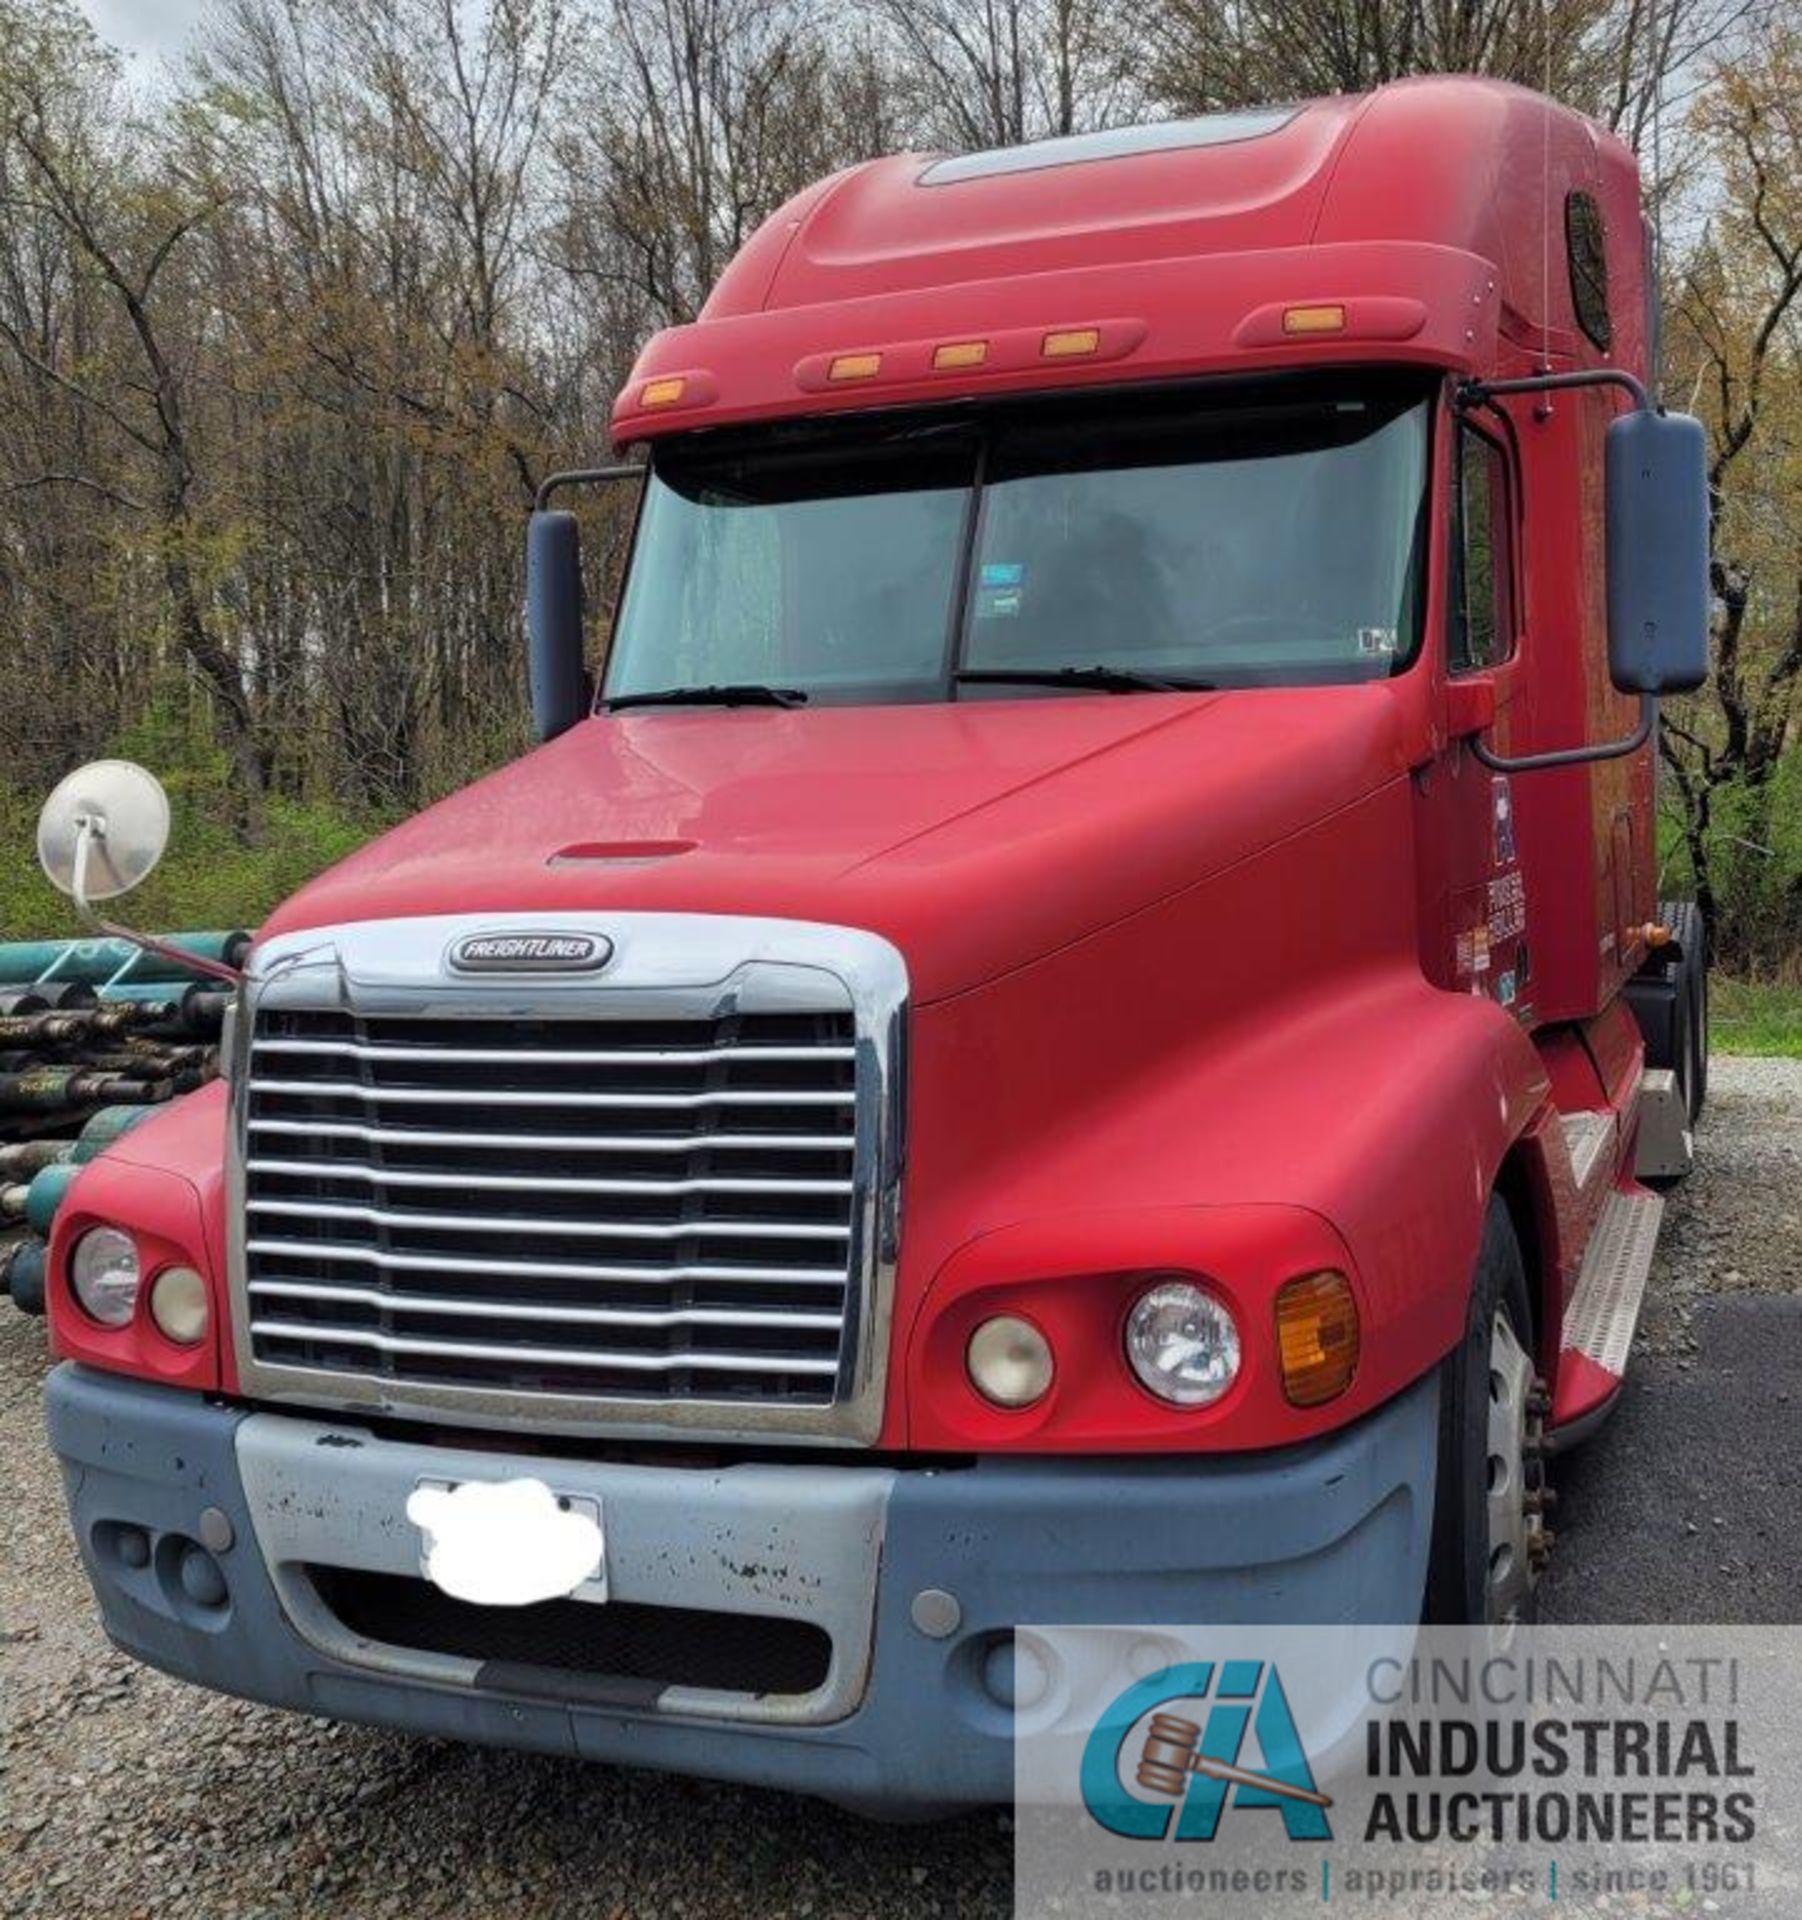 2010 Freightliner Sleeper Cab Road Tractor; Height: 13’ 6”, Towing capacity: 35,000 lbs., Mileage: